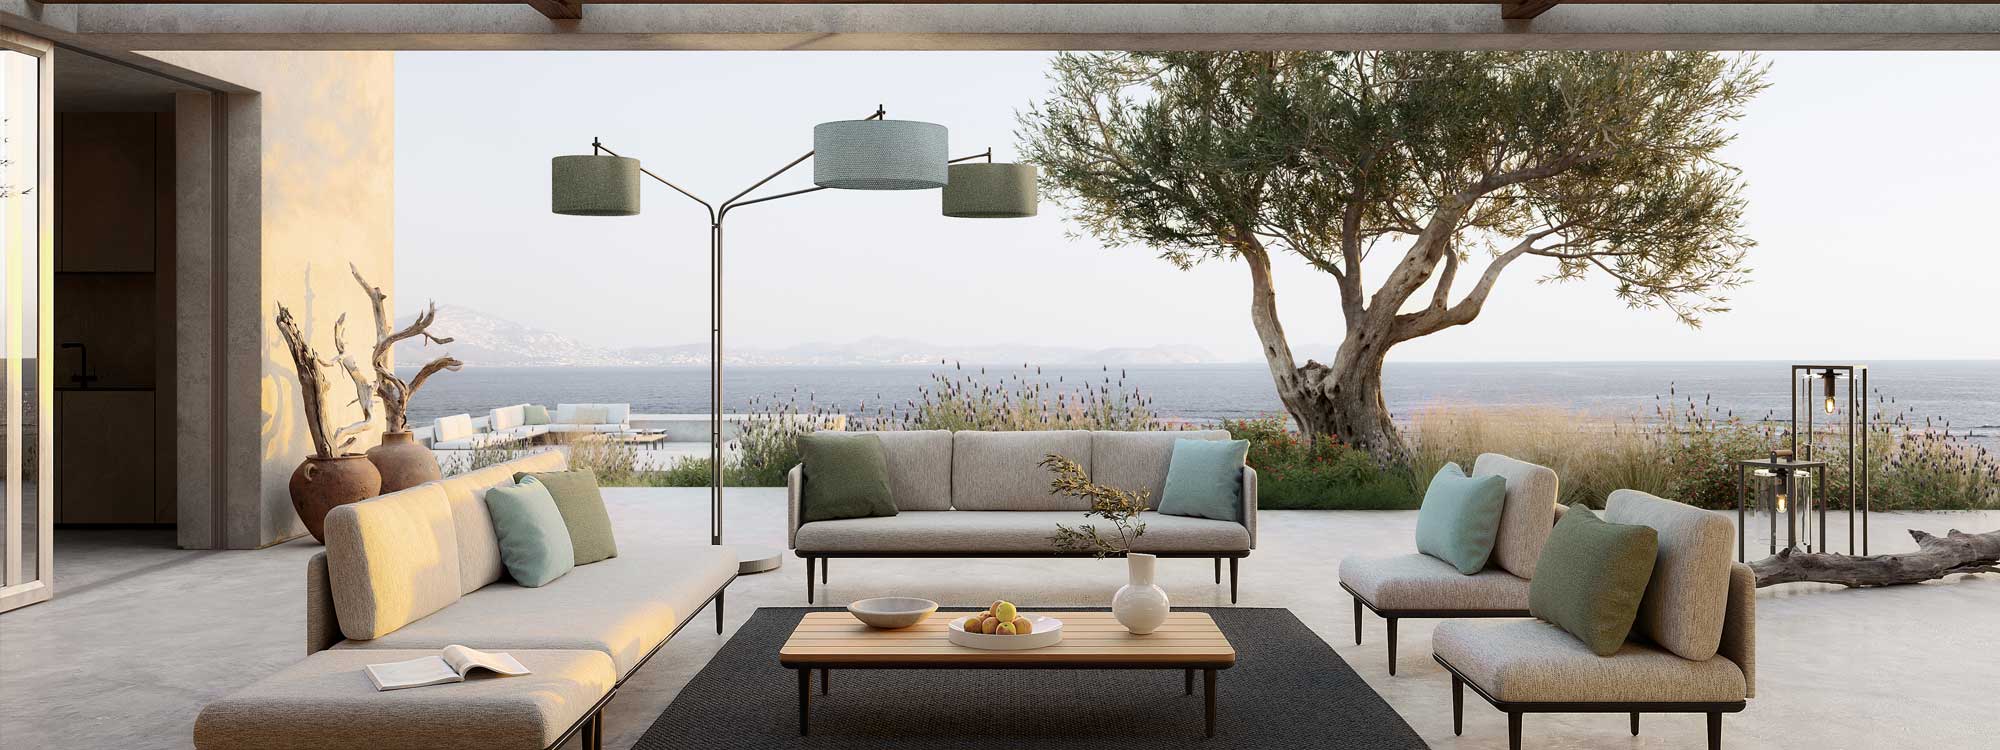 Image of Luniz outdoor floor lamp and Styletto Lounge garden sofa by Royal Botania